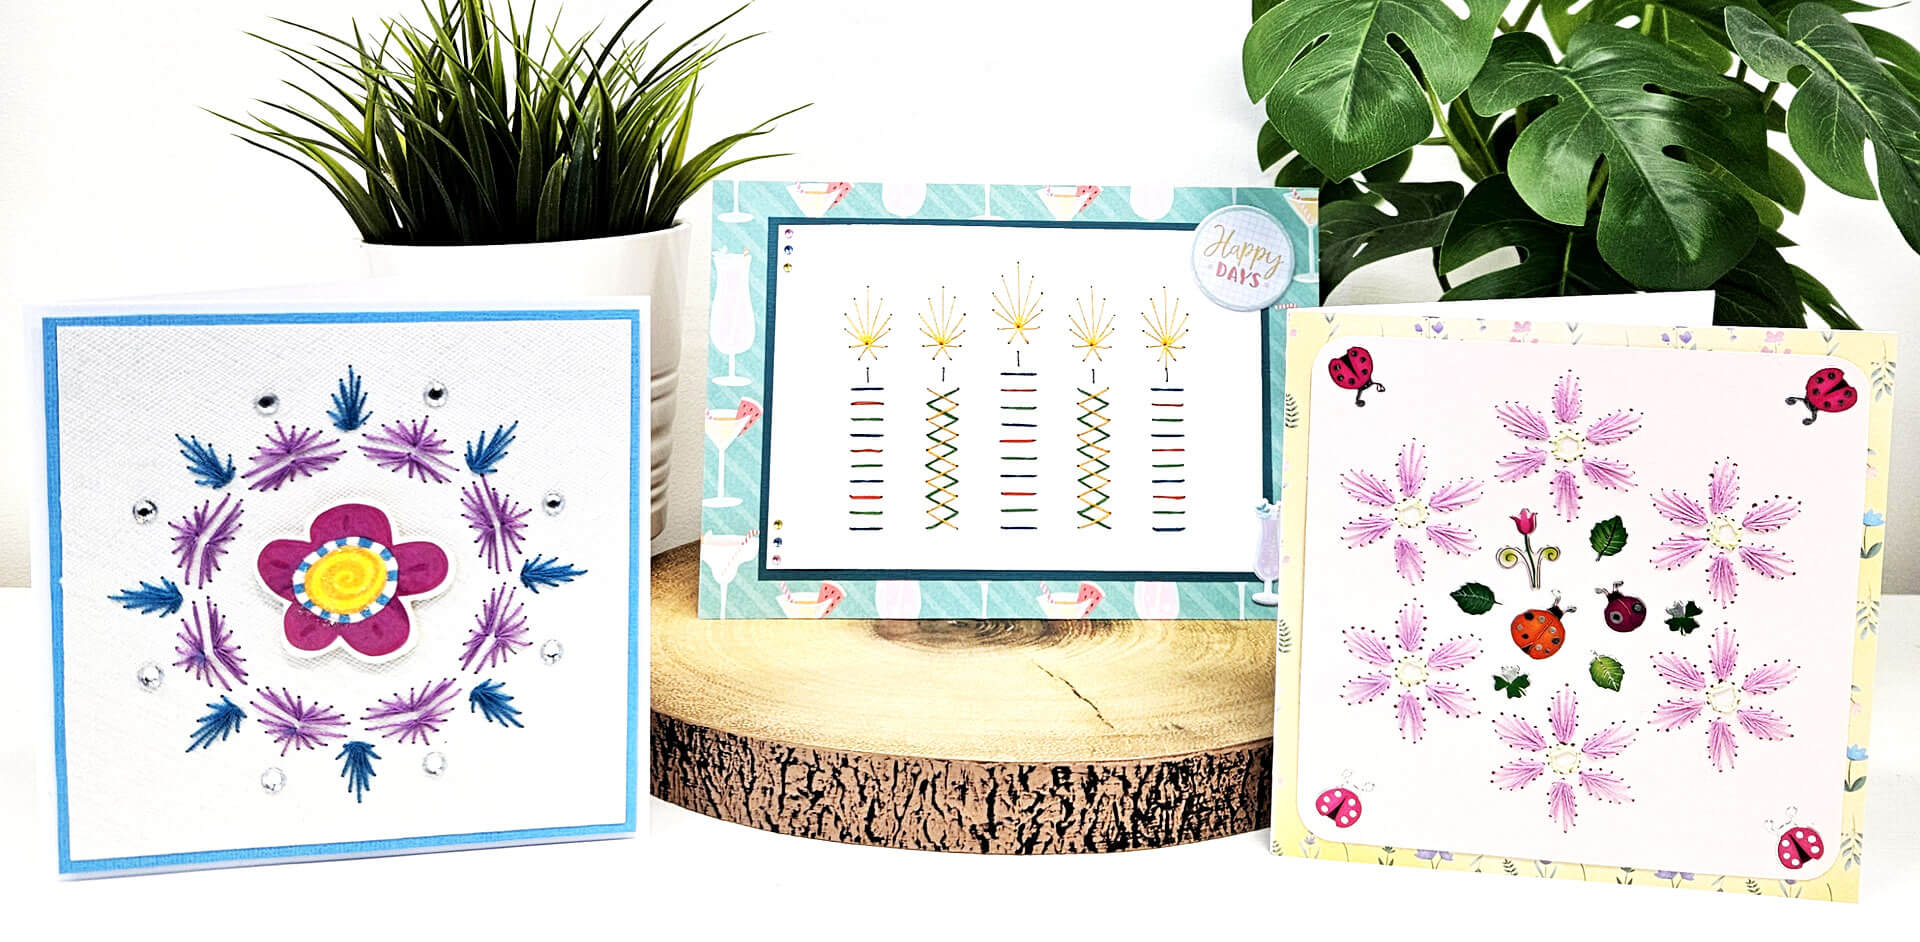 Stitching Cards Patterns: Paper Embroidery on Cards!